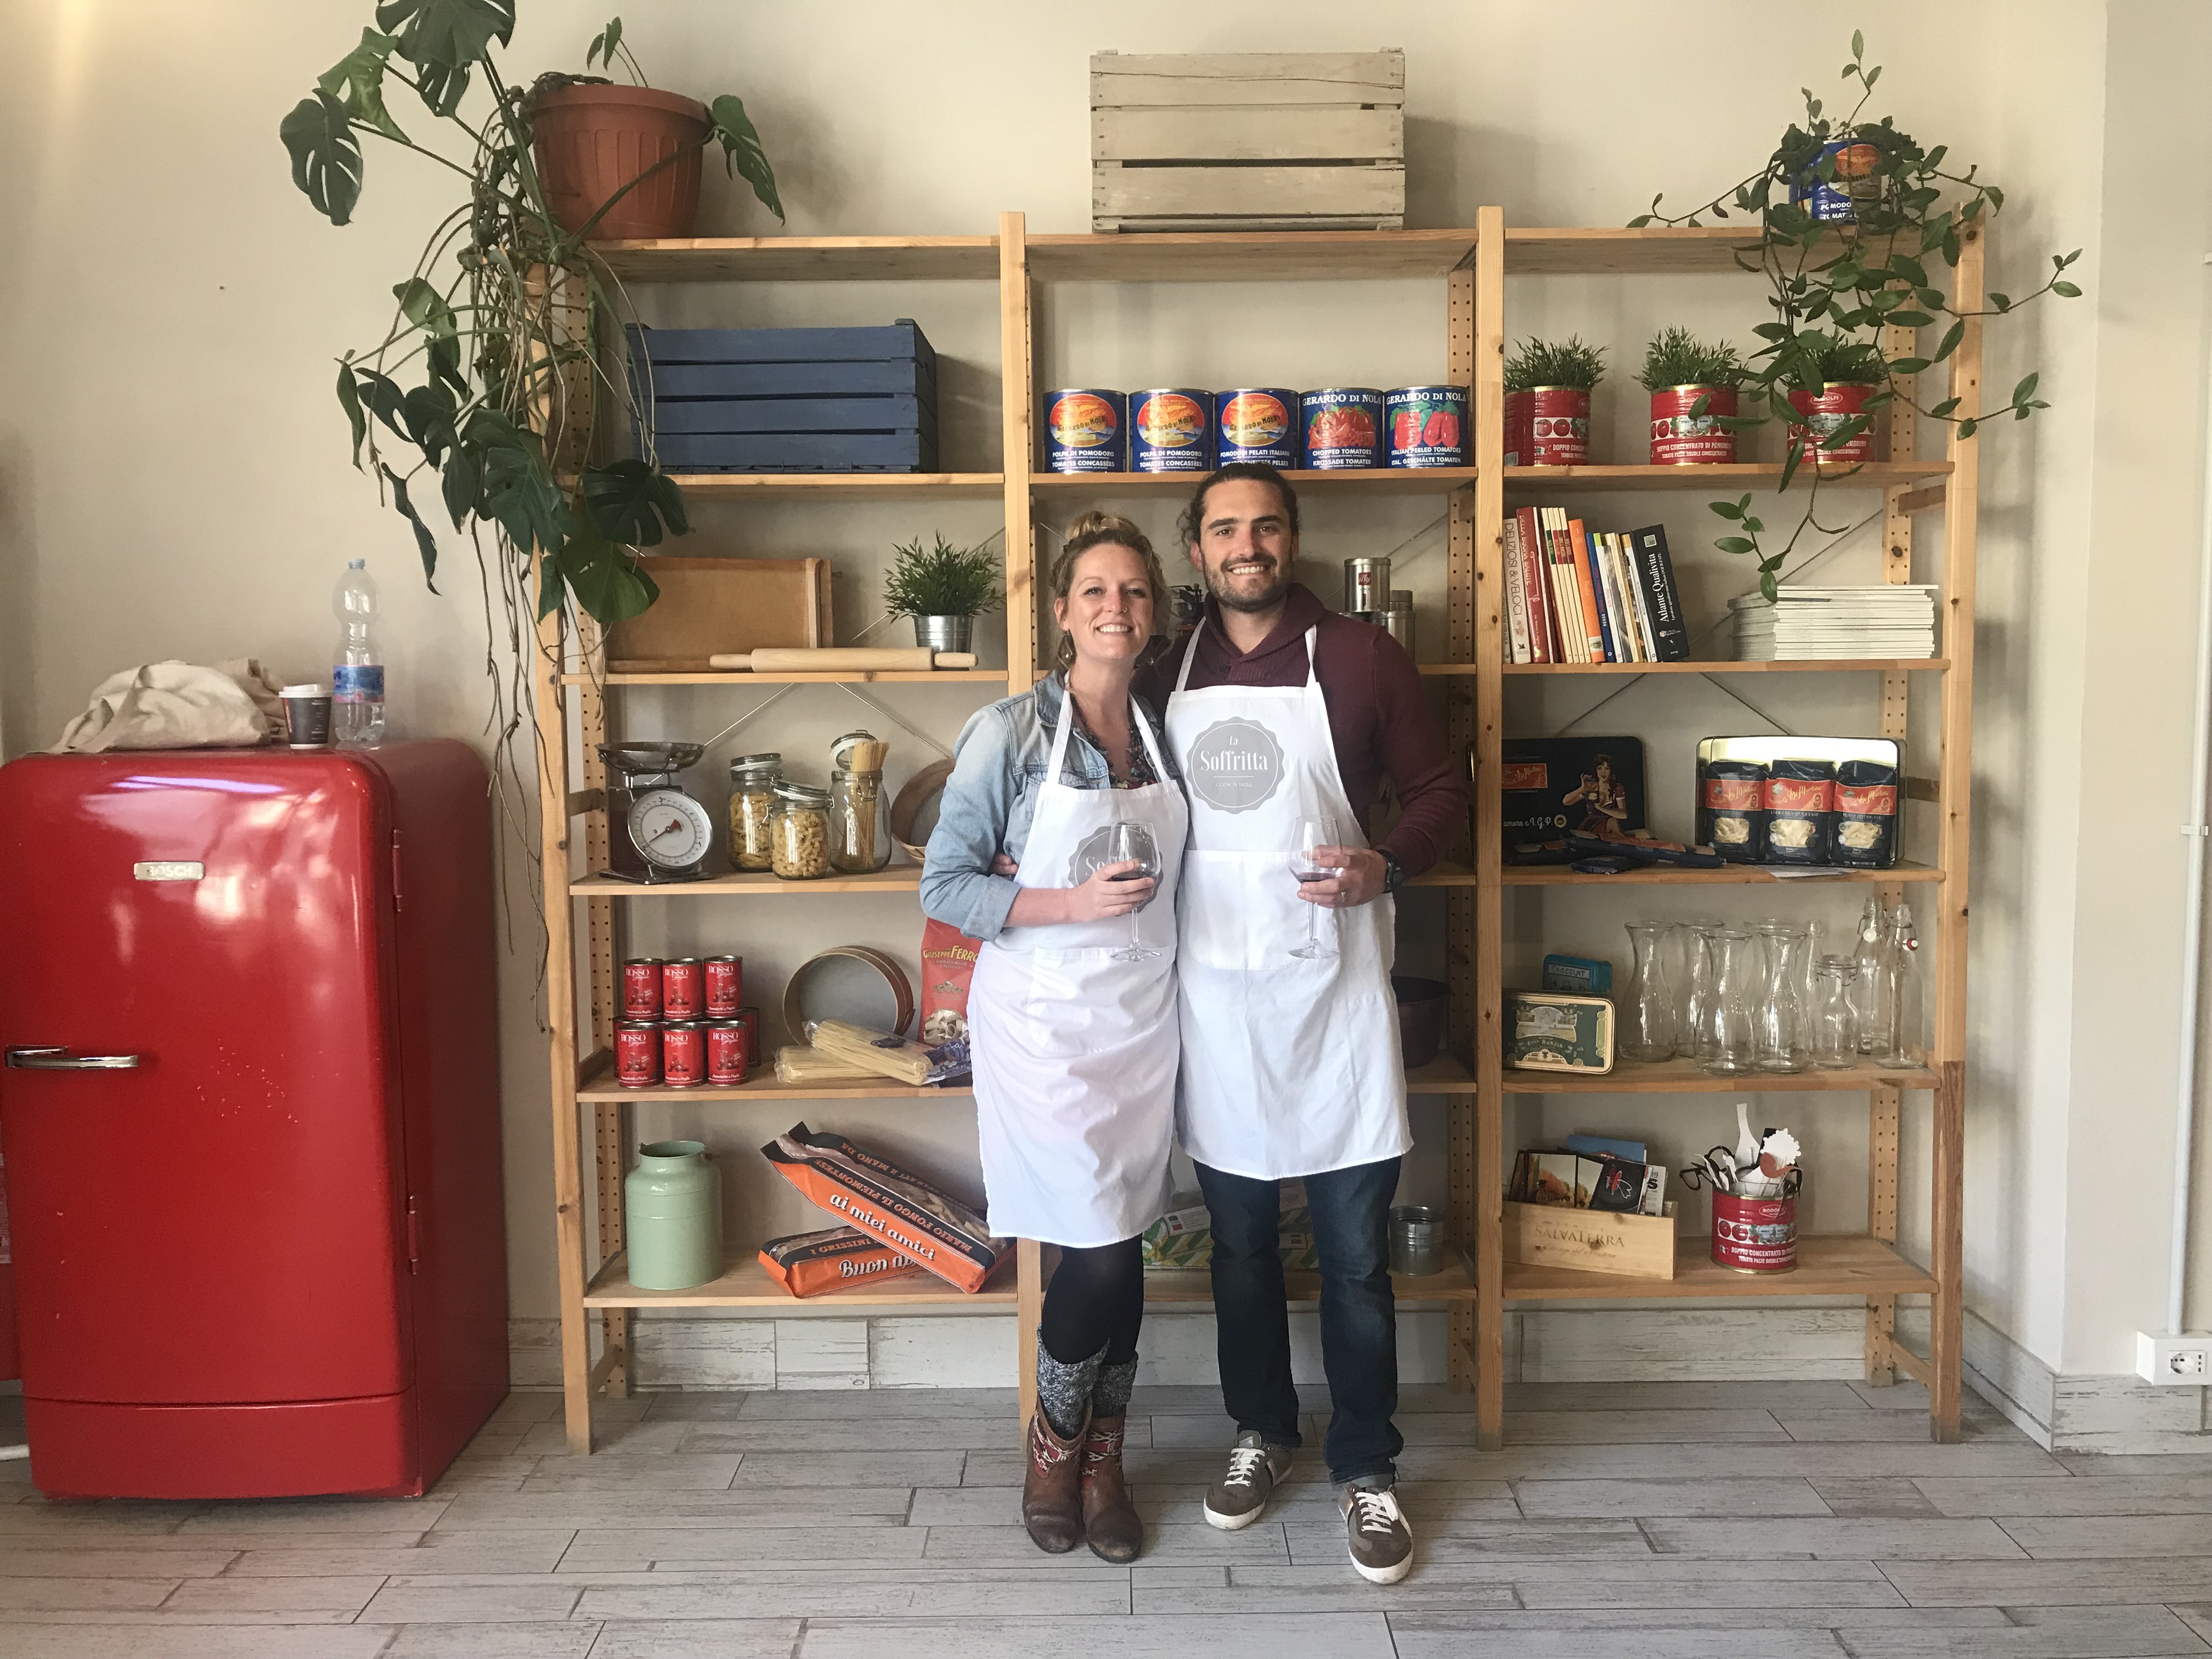 Chase Warrington cooking class Italy digital nomad work remote abroad